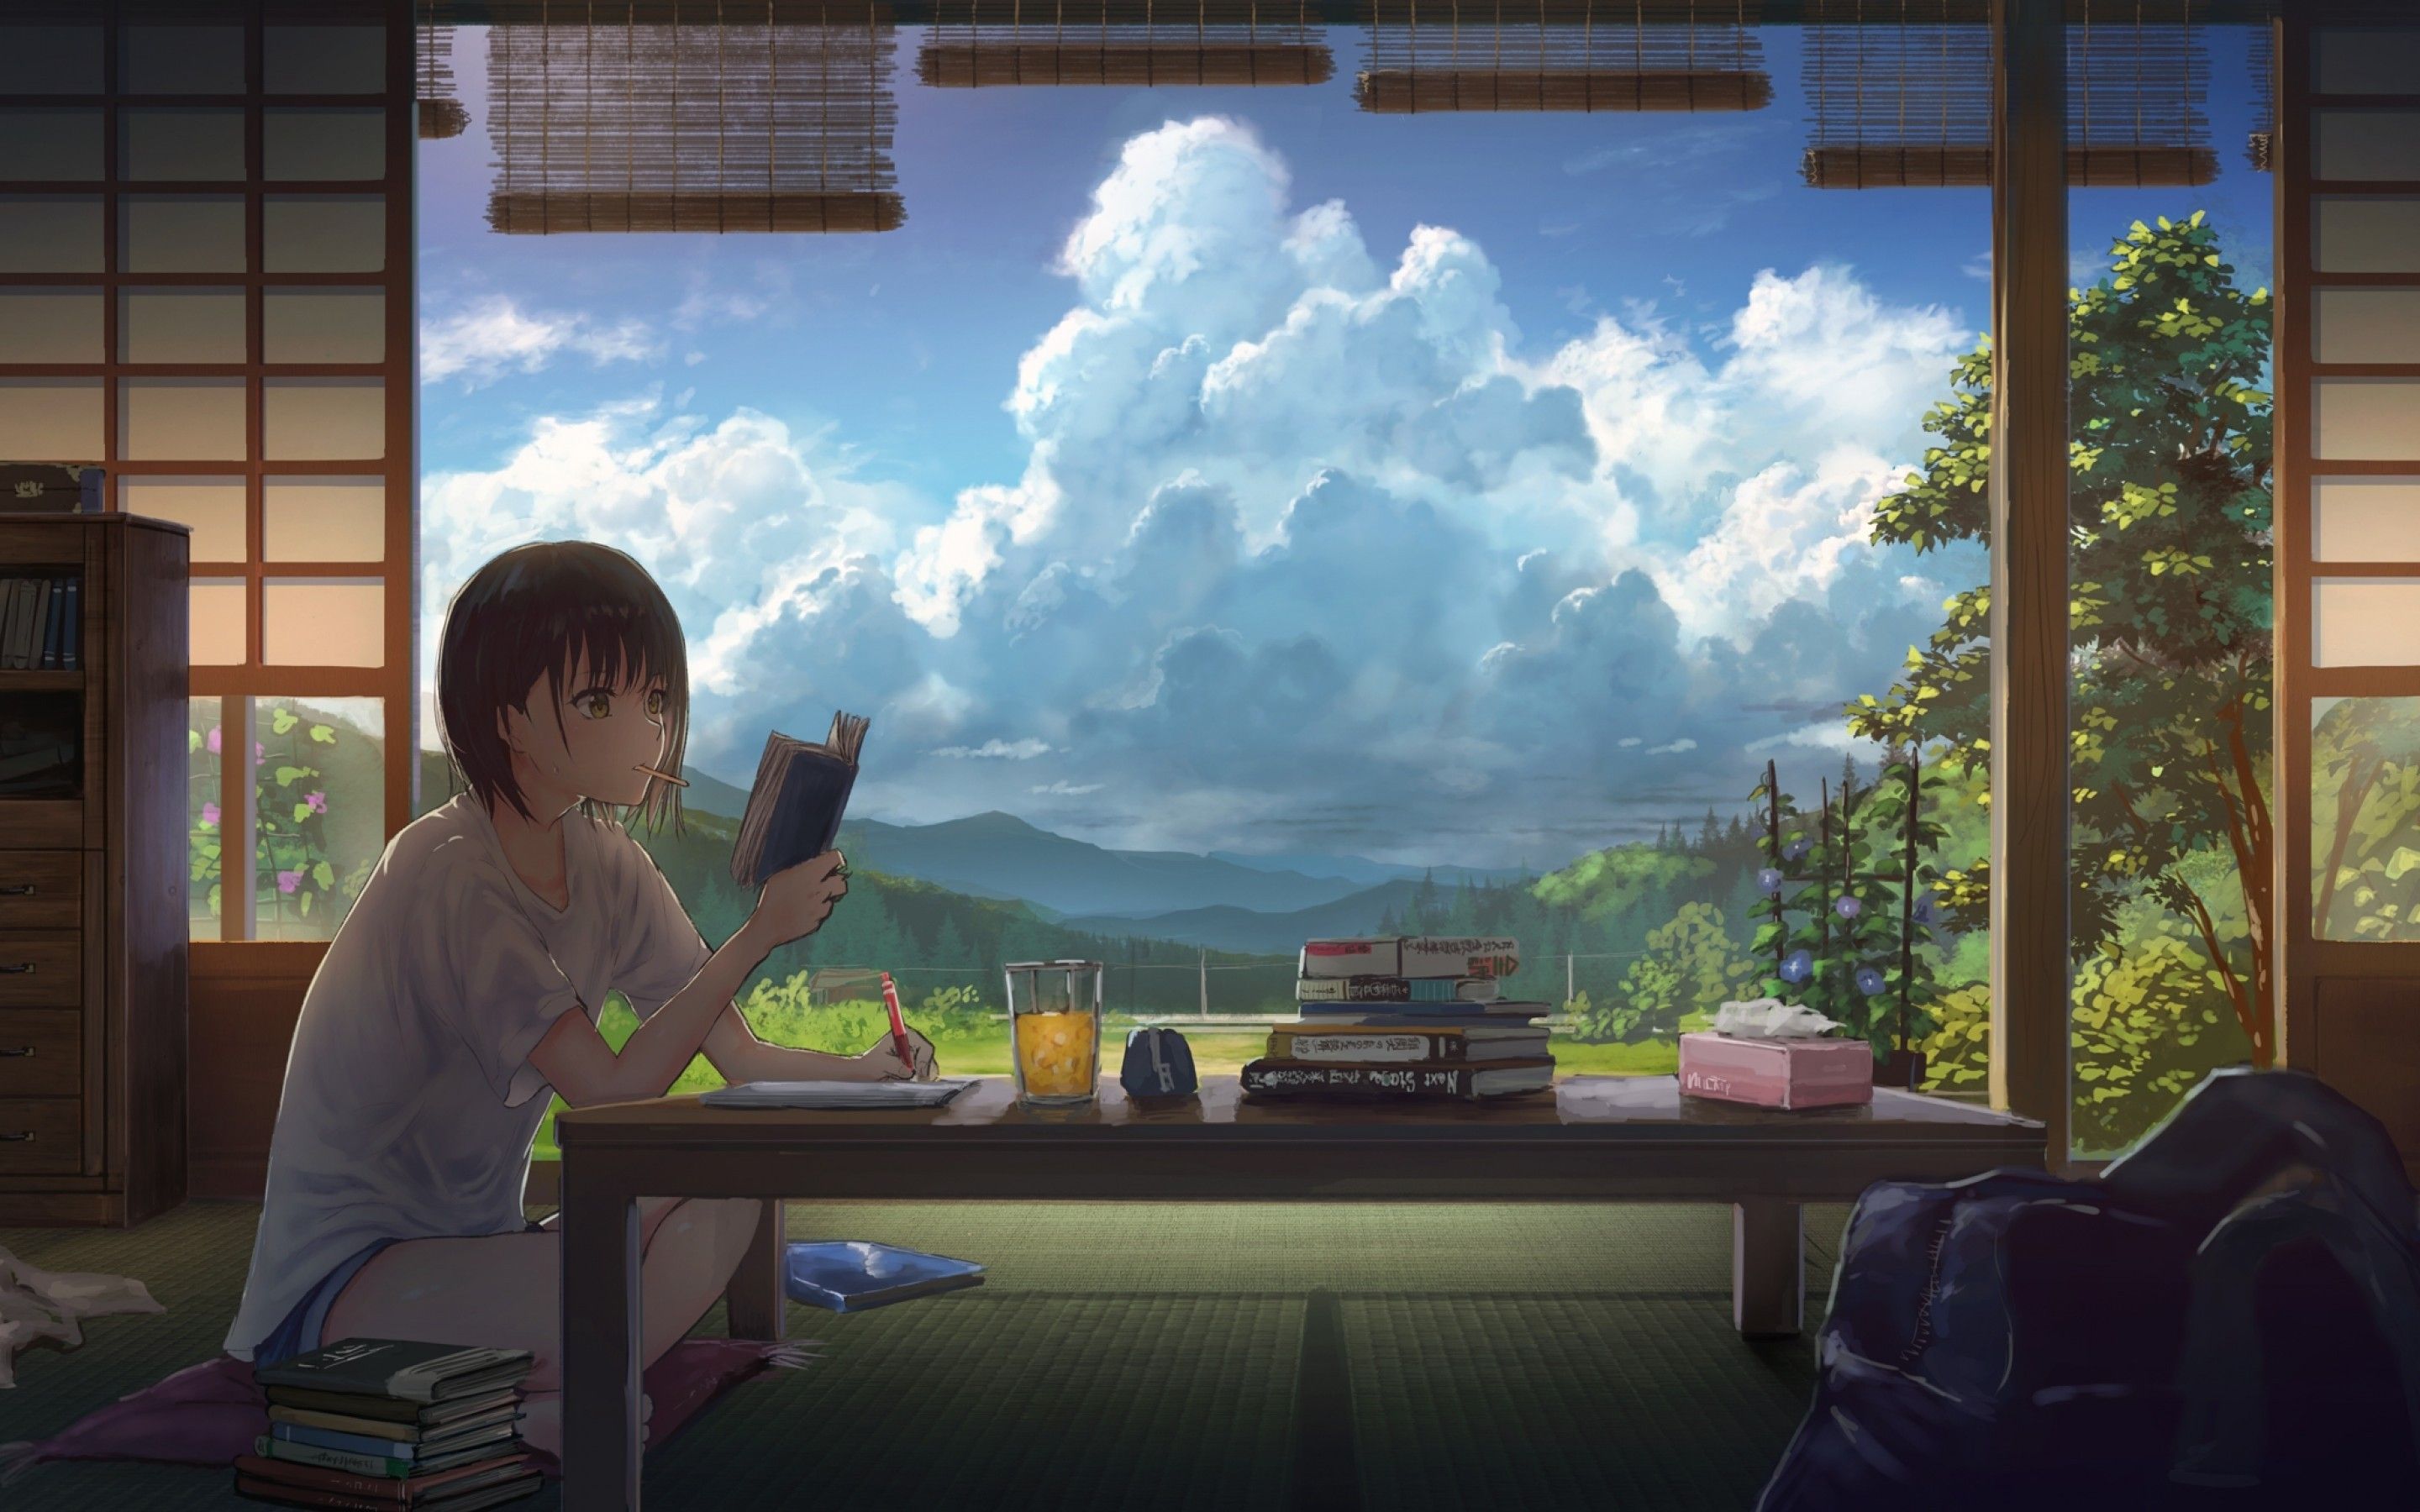 Download 2880x1800 Anime Girl, Reading, Summer, Clouds, Scenic